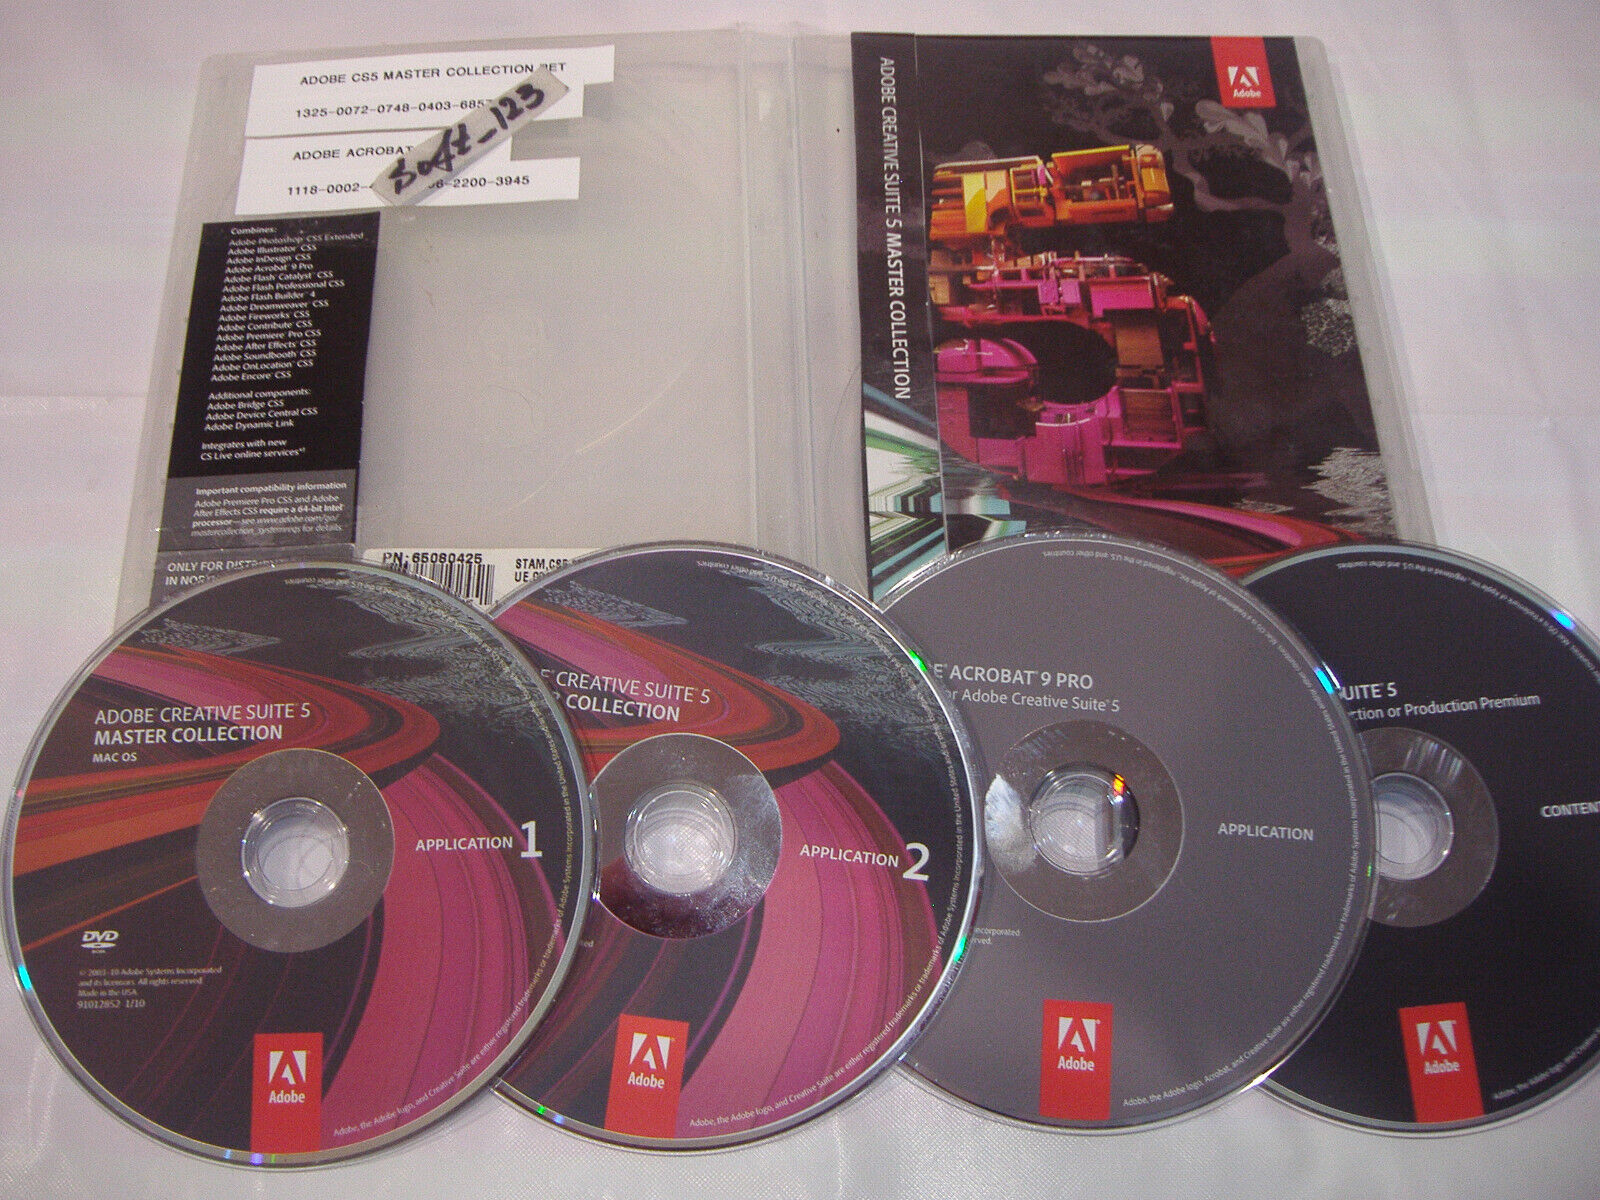 Adobe Creative Suite 5 CS5 Master Collection For MAC OS Full DVD Version